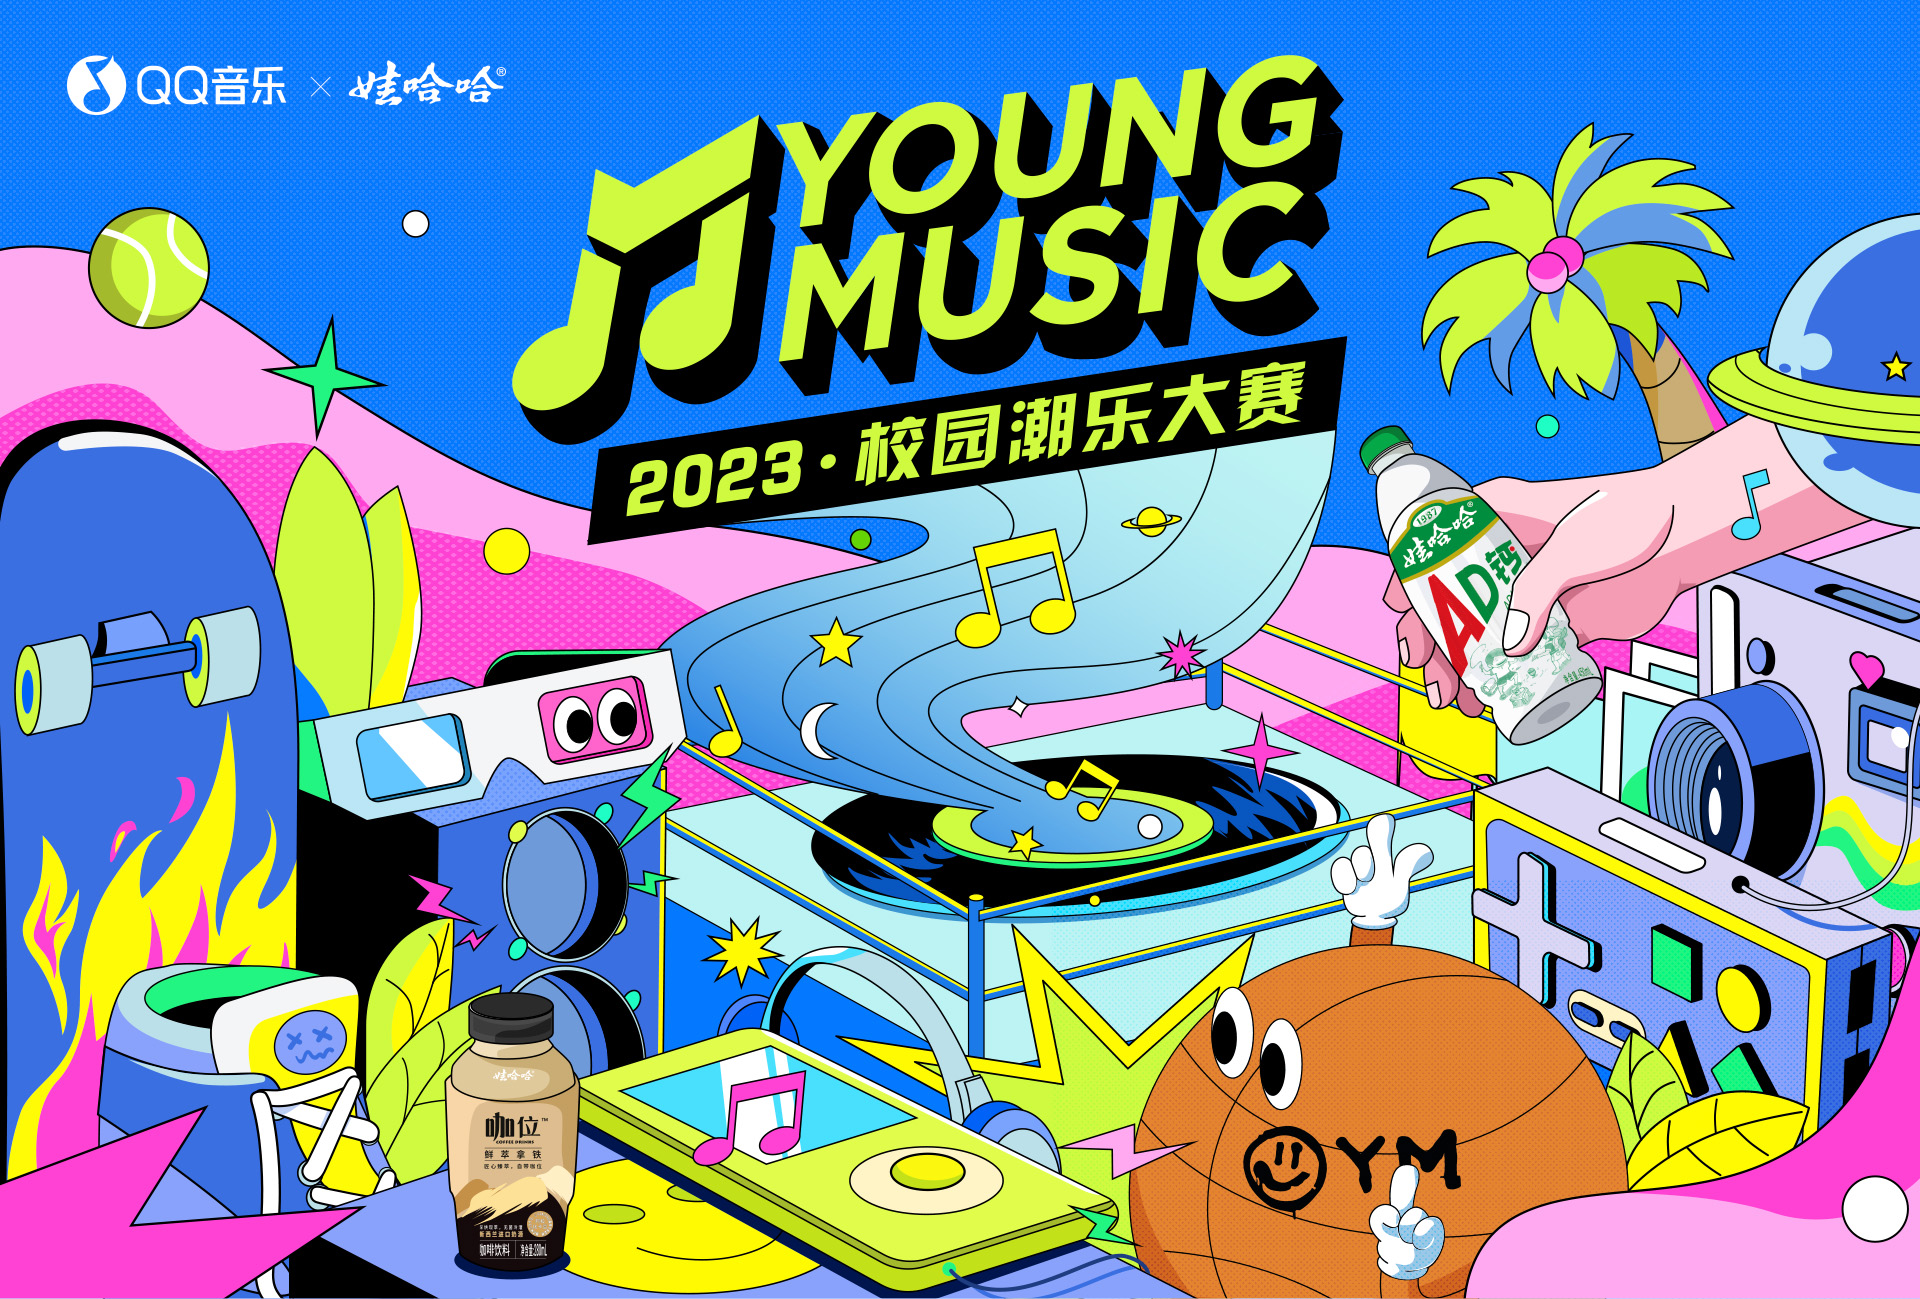 YOUNG MUSIC Keyvisual